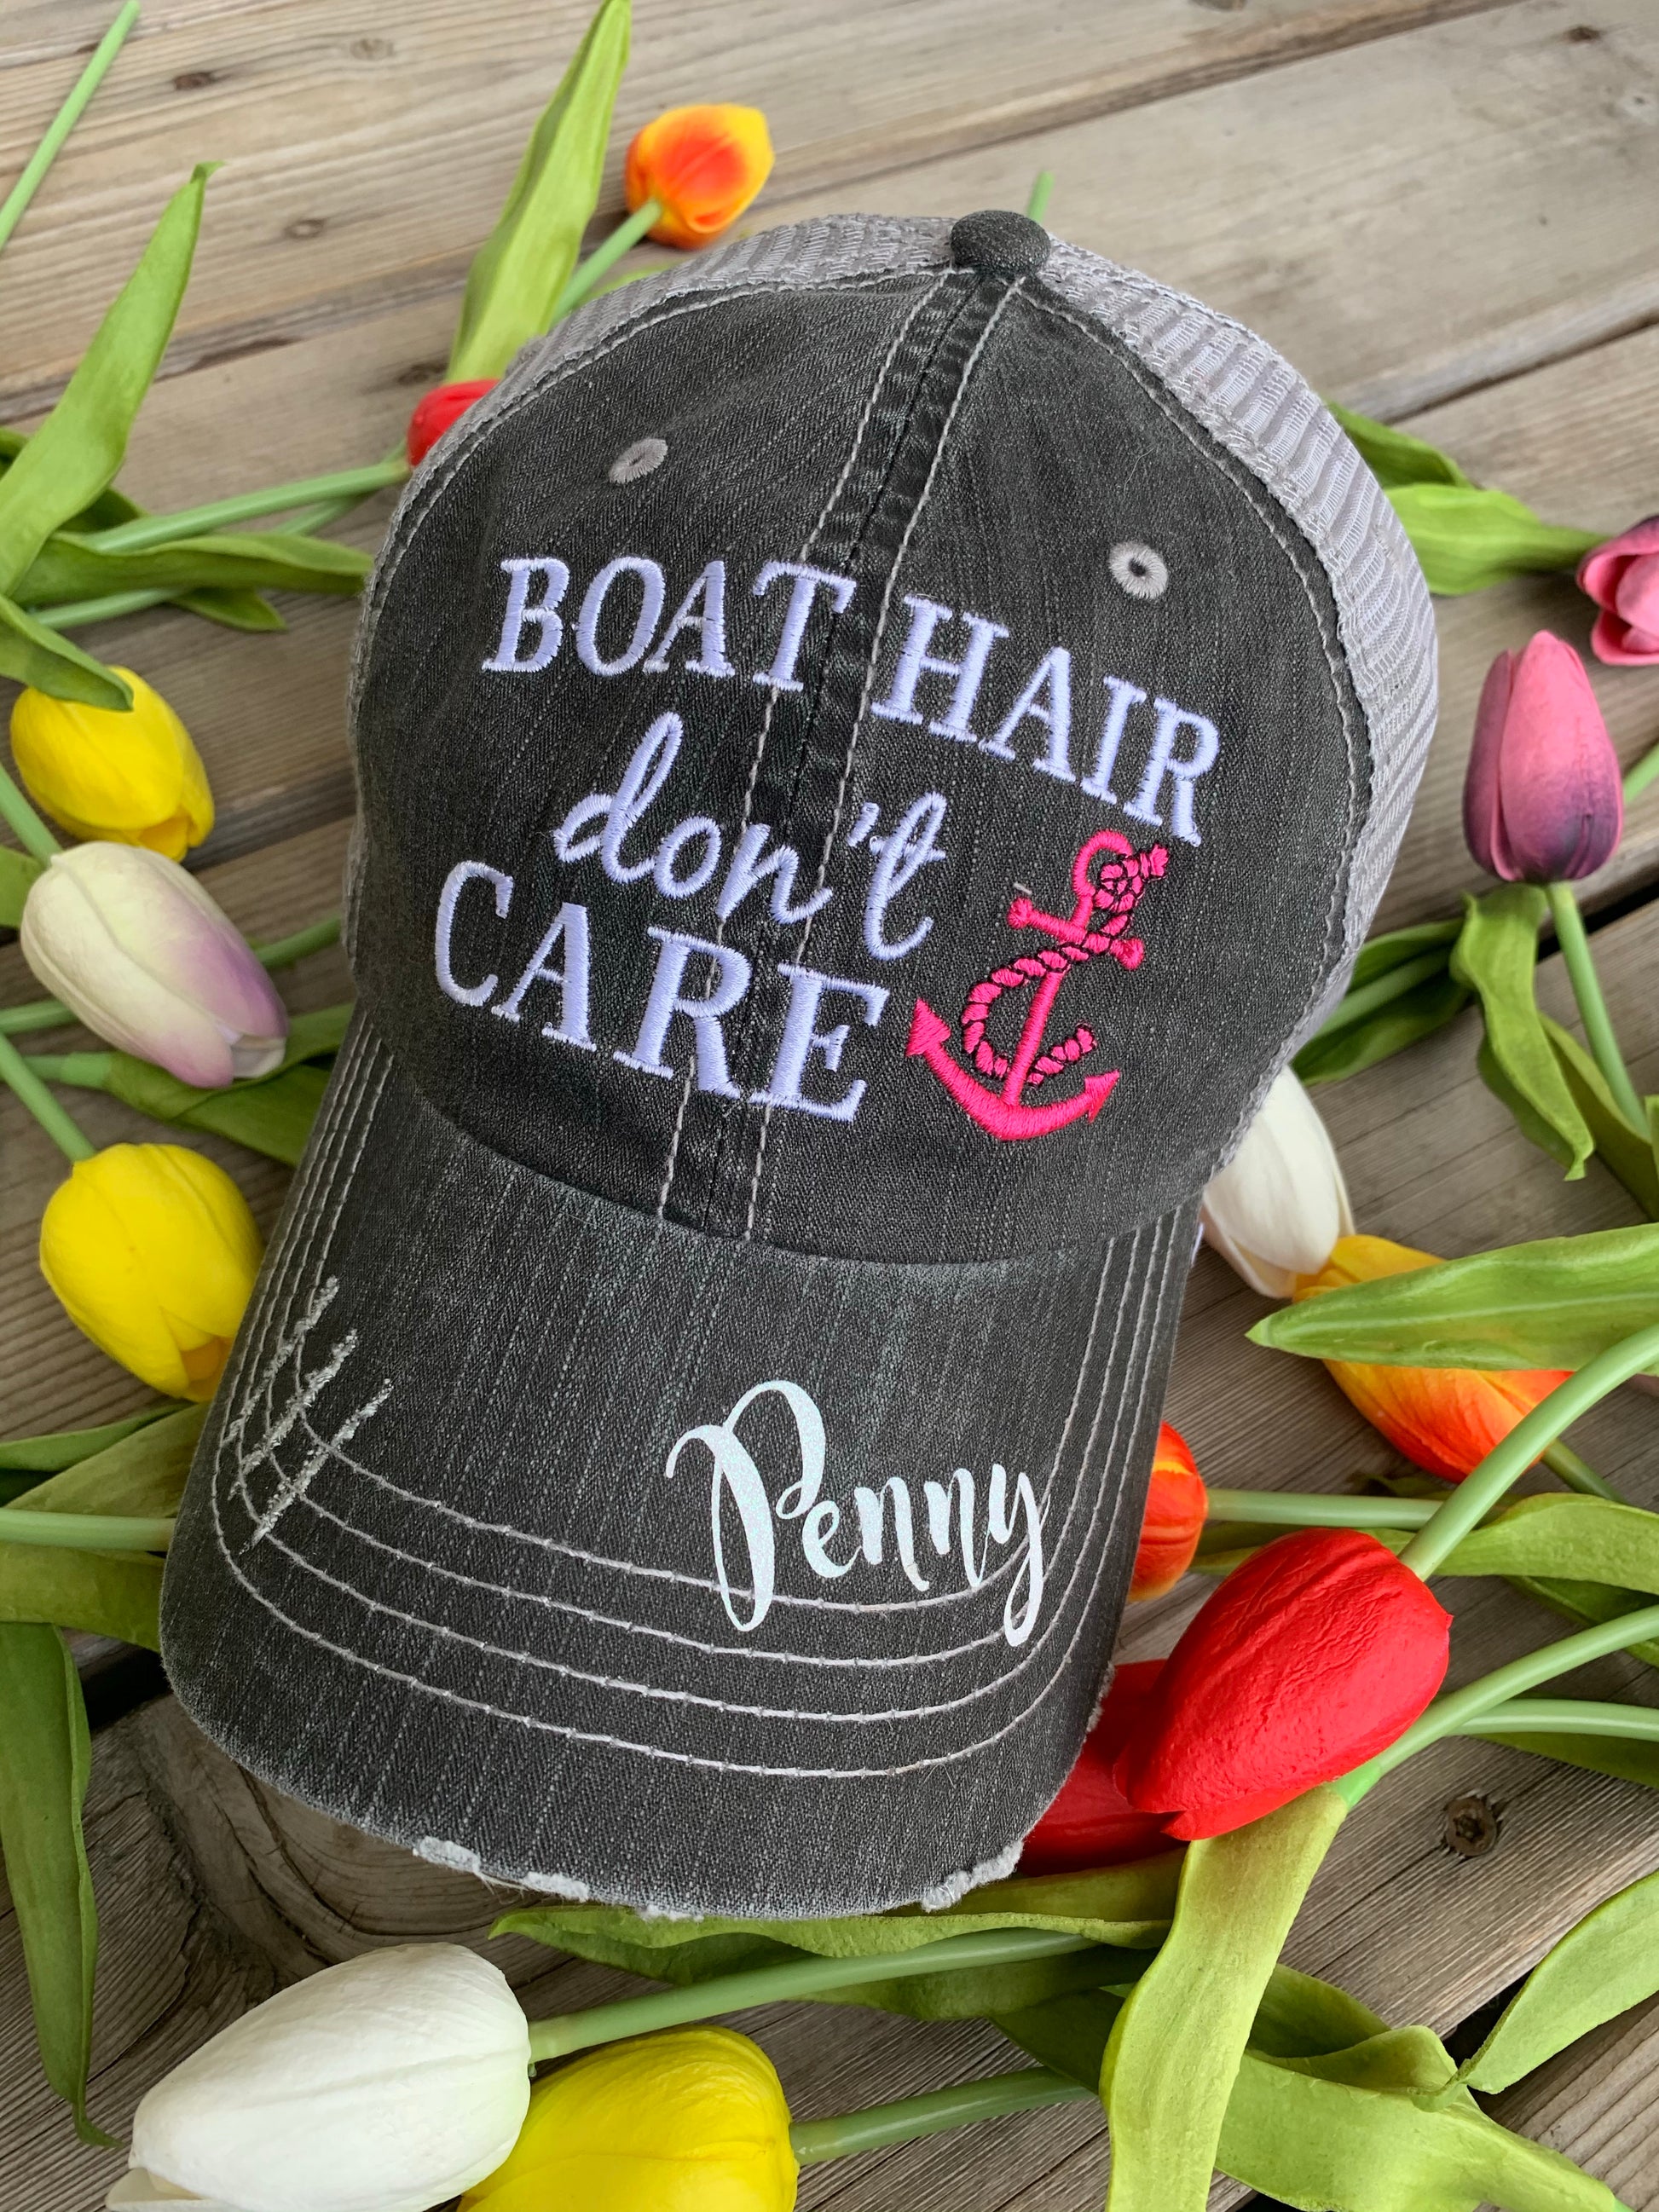 Pool hats Embroidered gray distressed unisex trucker caps Pool hair dont care Pool please Flamingos Flip flops - Stacy's Pink Martini Boutique